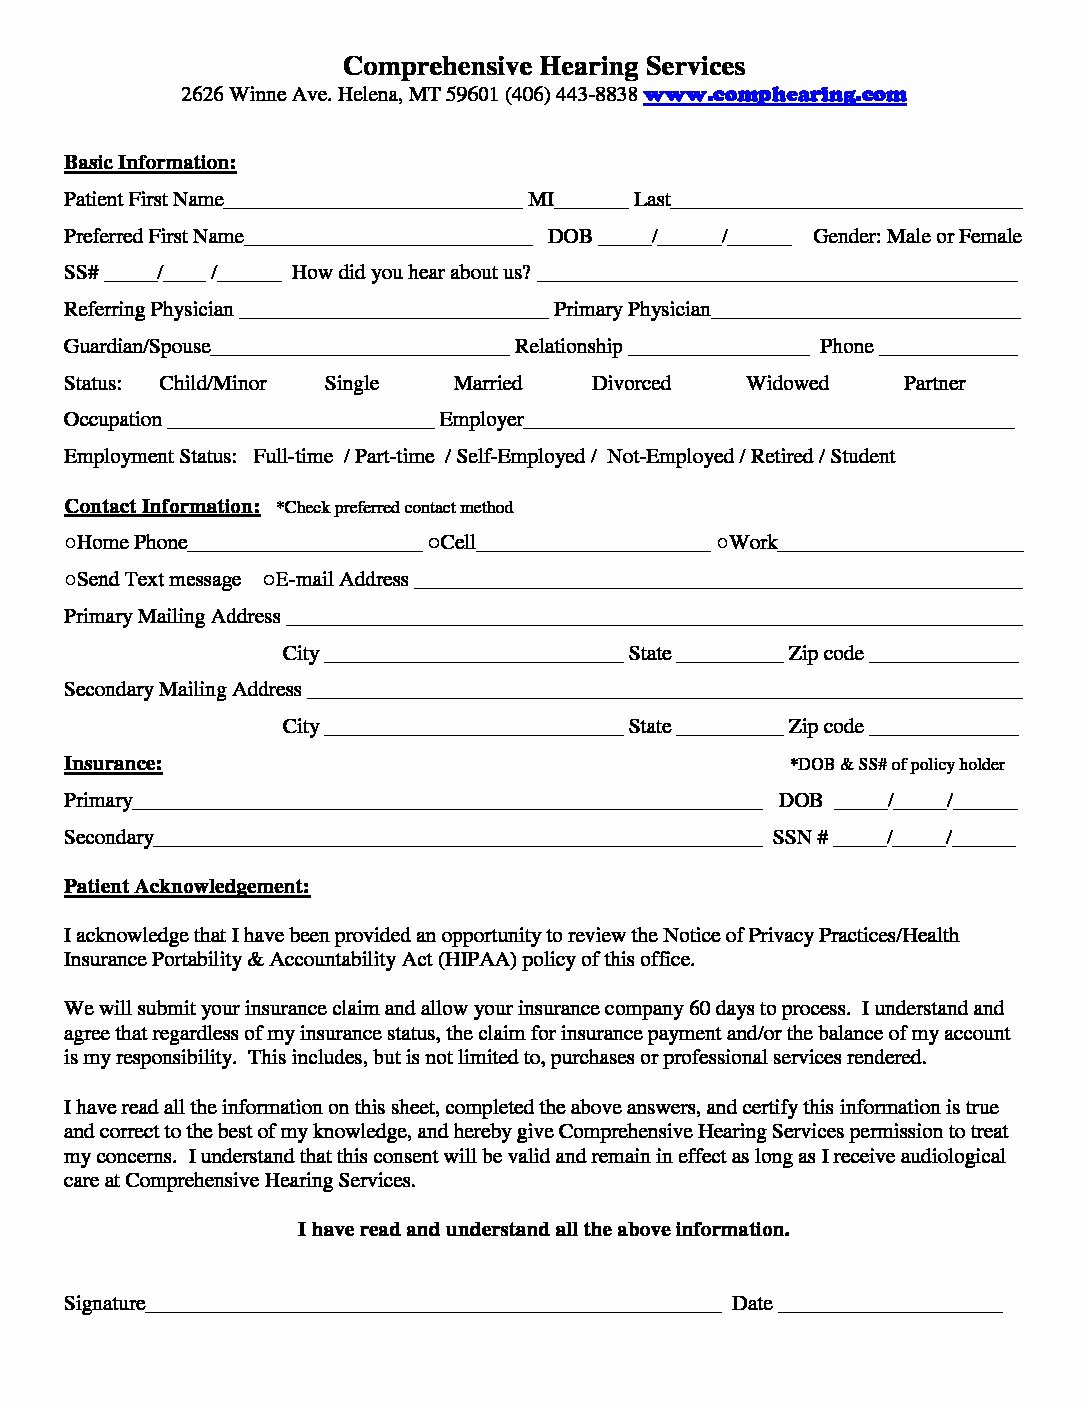 Patient Intake form Pdf Fresh Patient Intake form 9 19 17 Prehensive Hearing Services